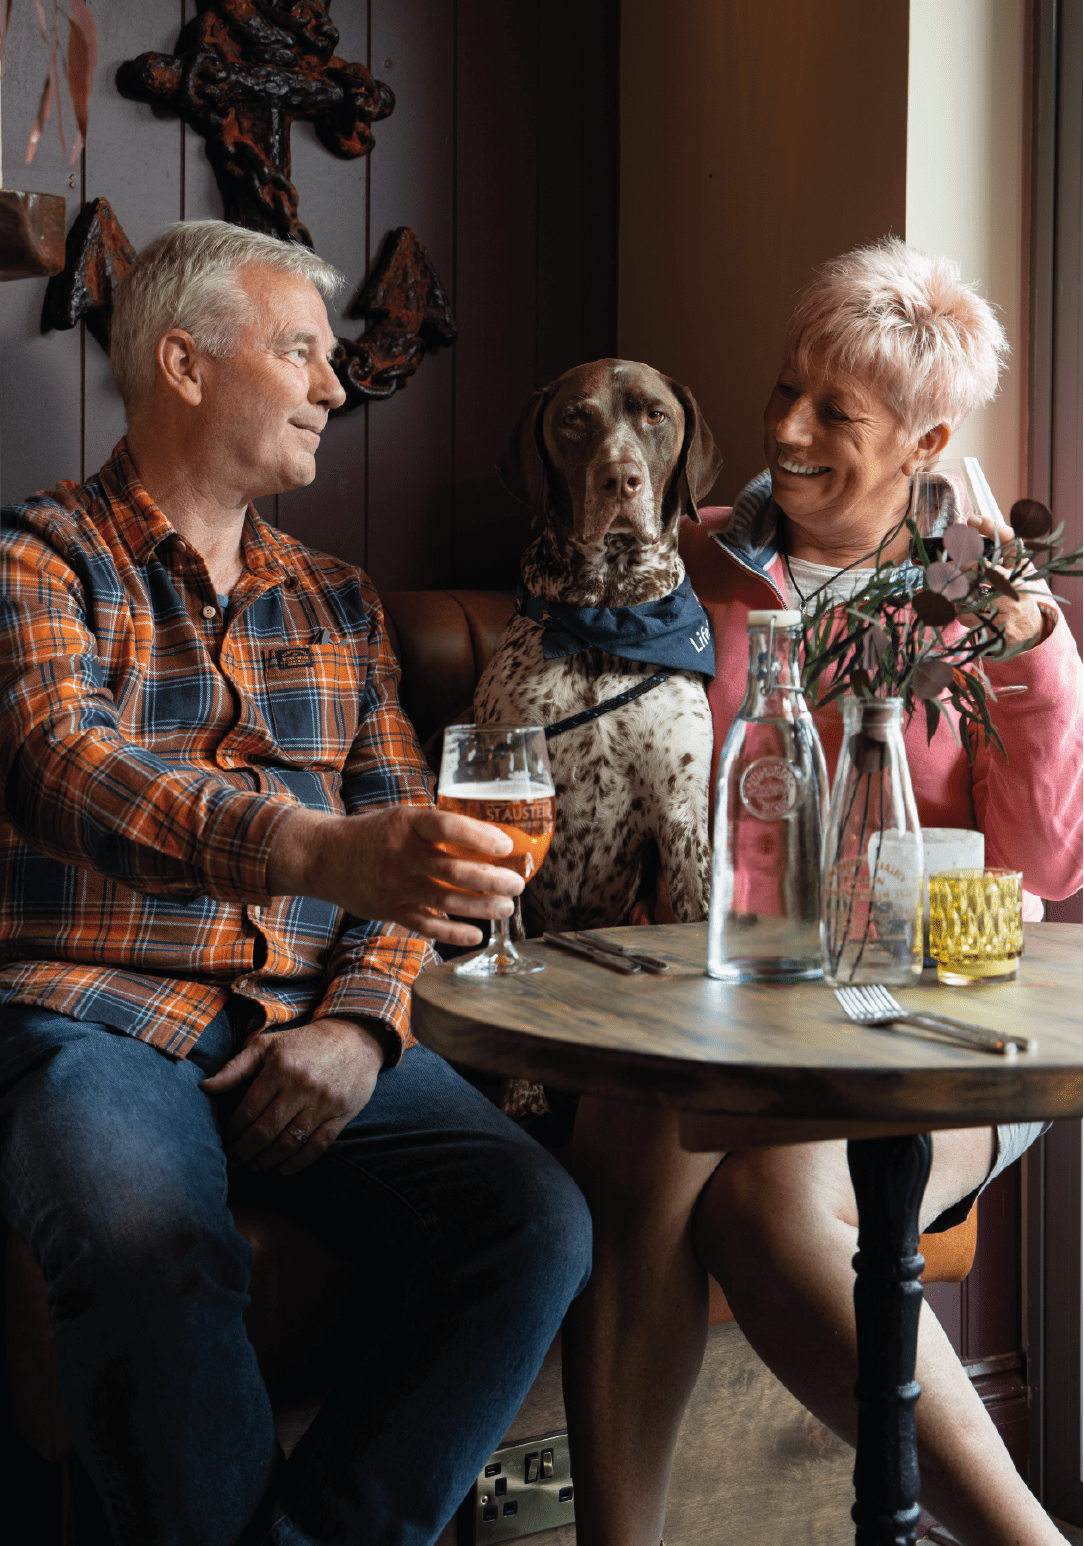 Couple in pub with dog.